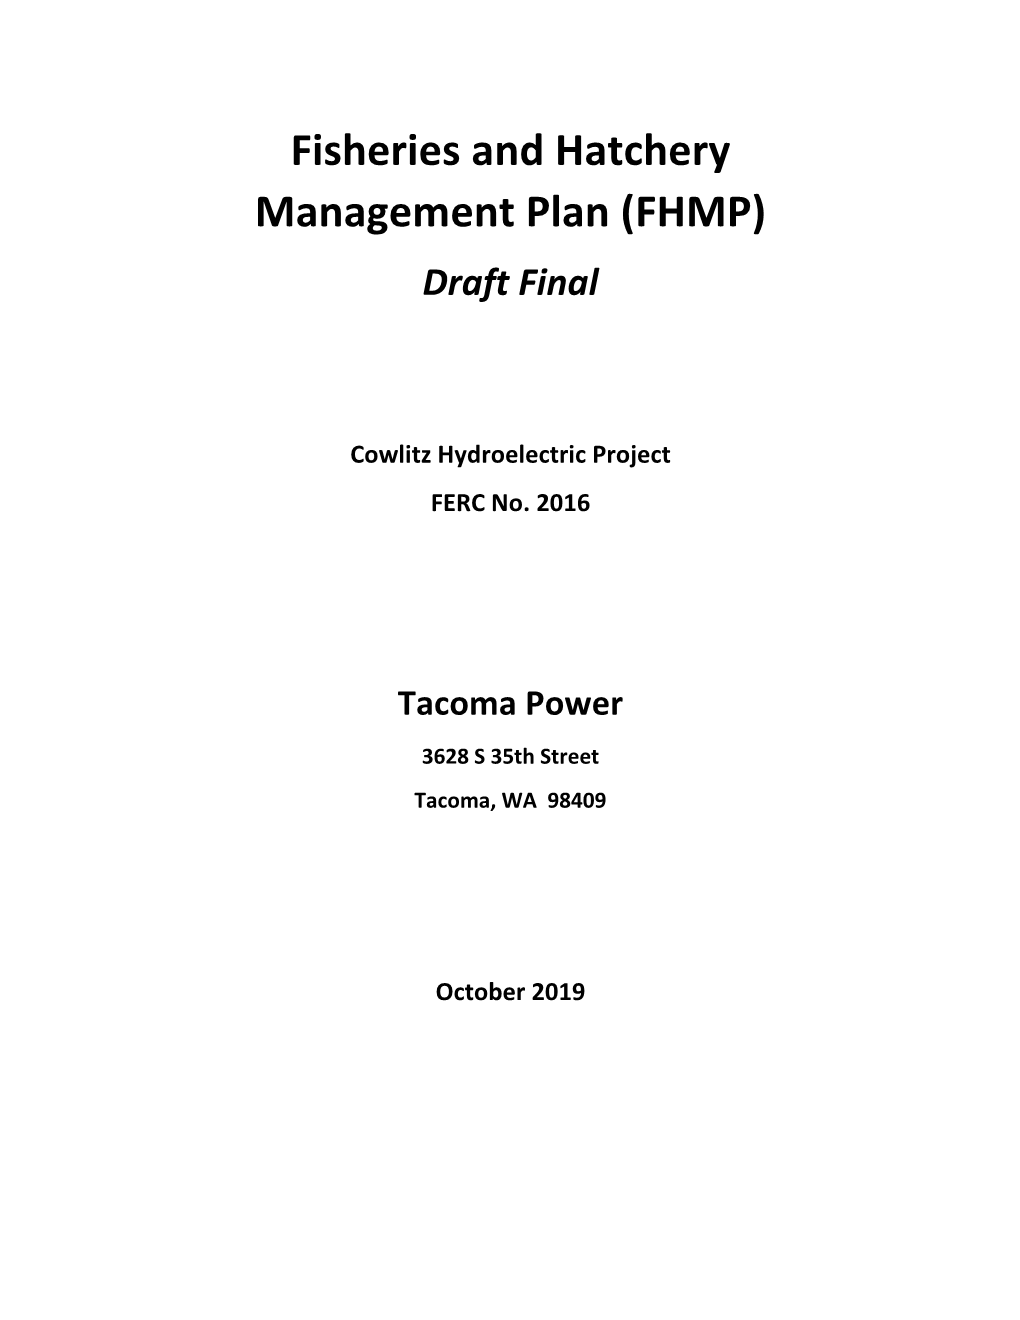 Fisheries and Hatchery Management Plan (FHMP) Draft Final